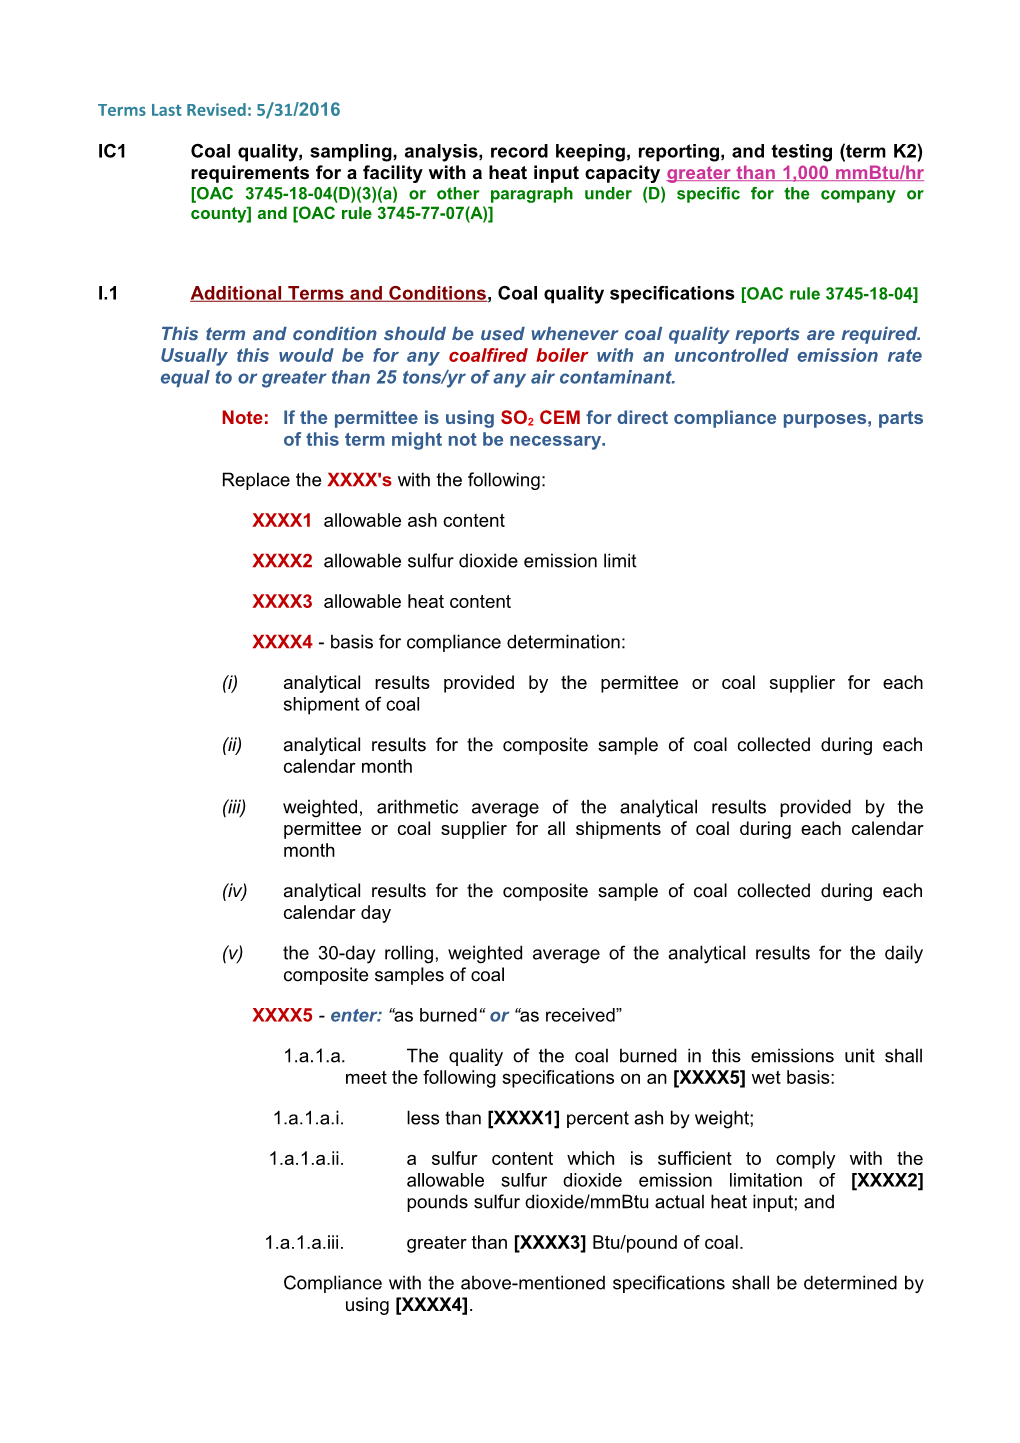 I.1 Additional Terms and Conditions, Coal Quality Specifications OAC Rule 3745-18-04